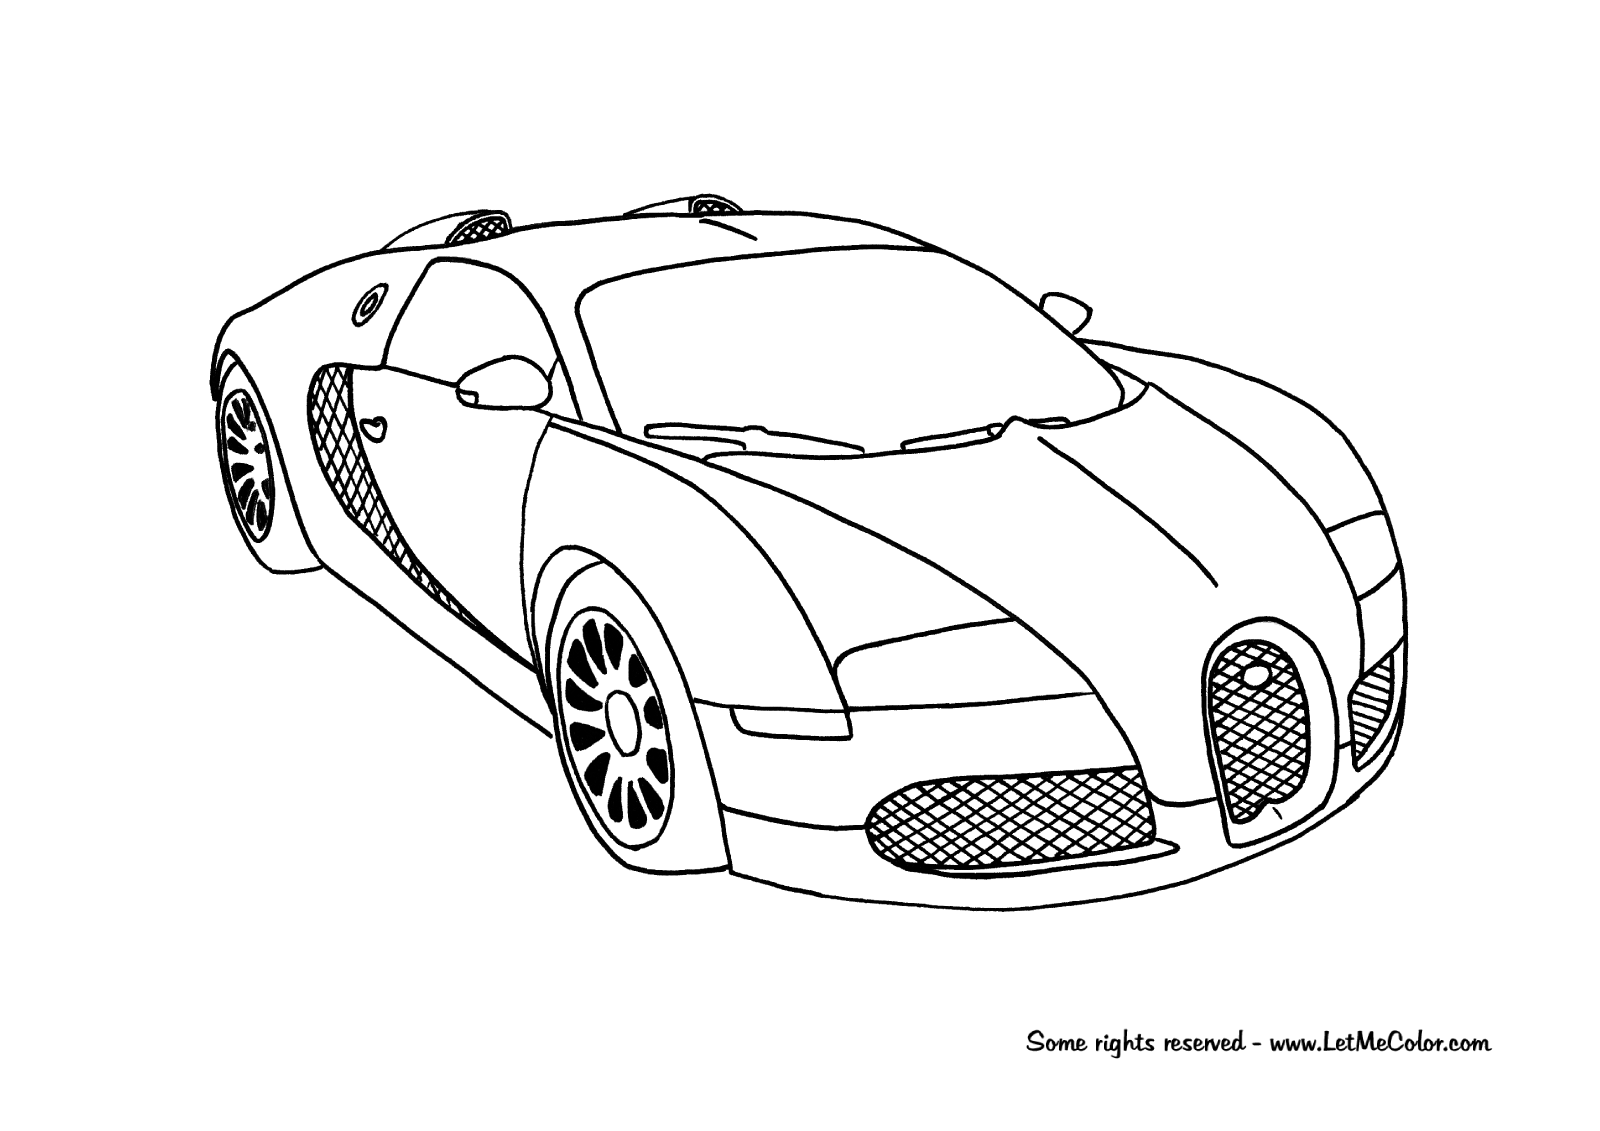 460 Top Car Coloring Pages Bugatti Download Free Images